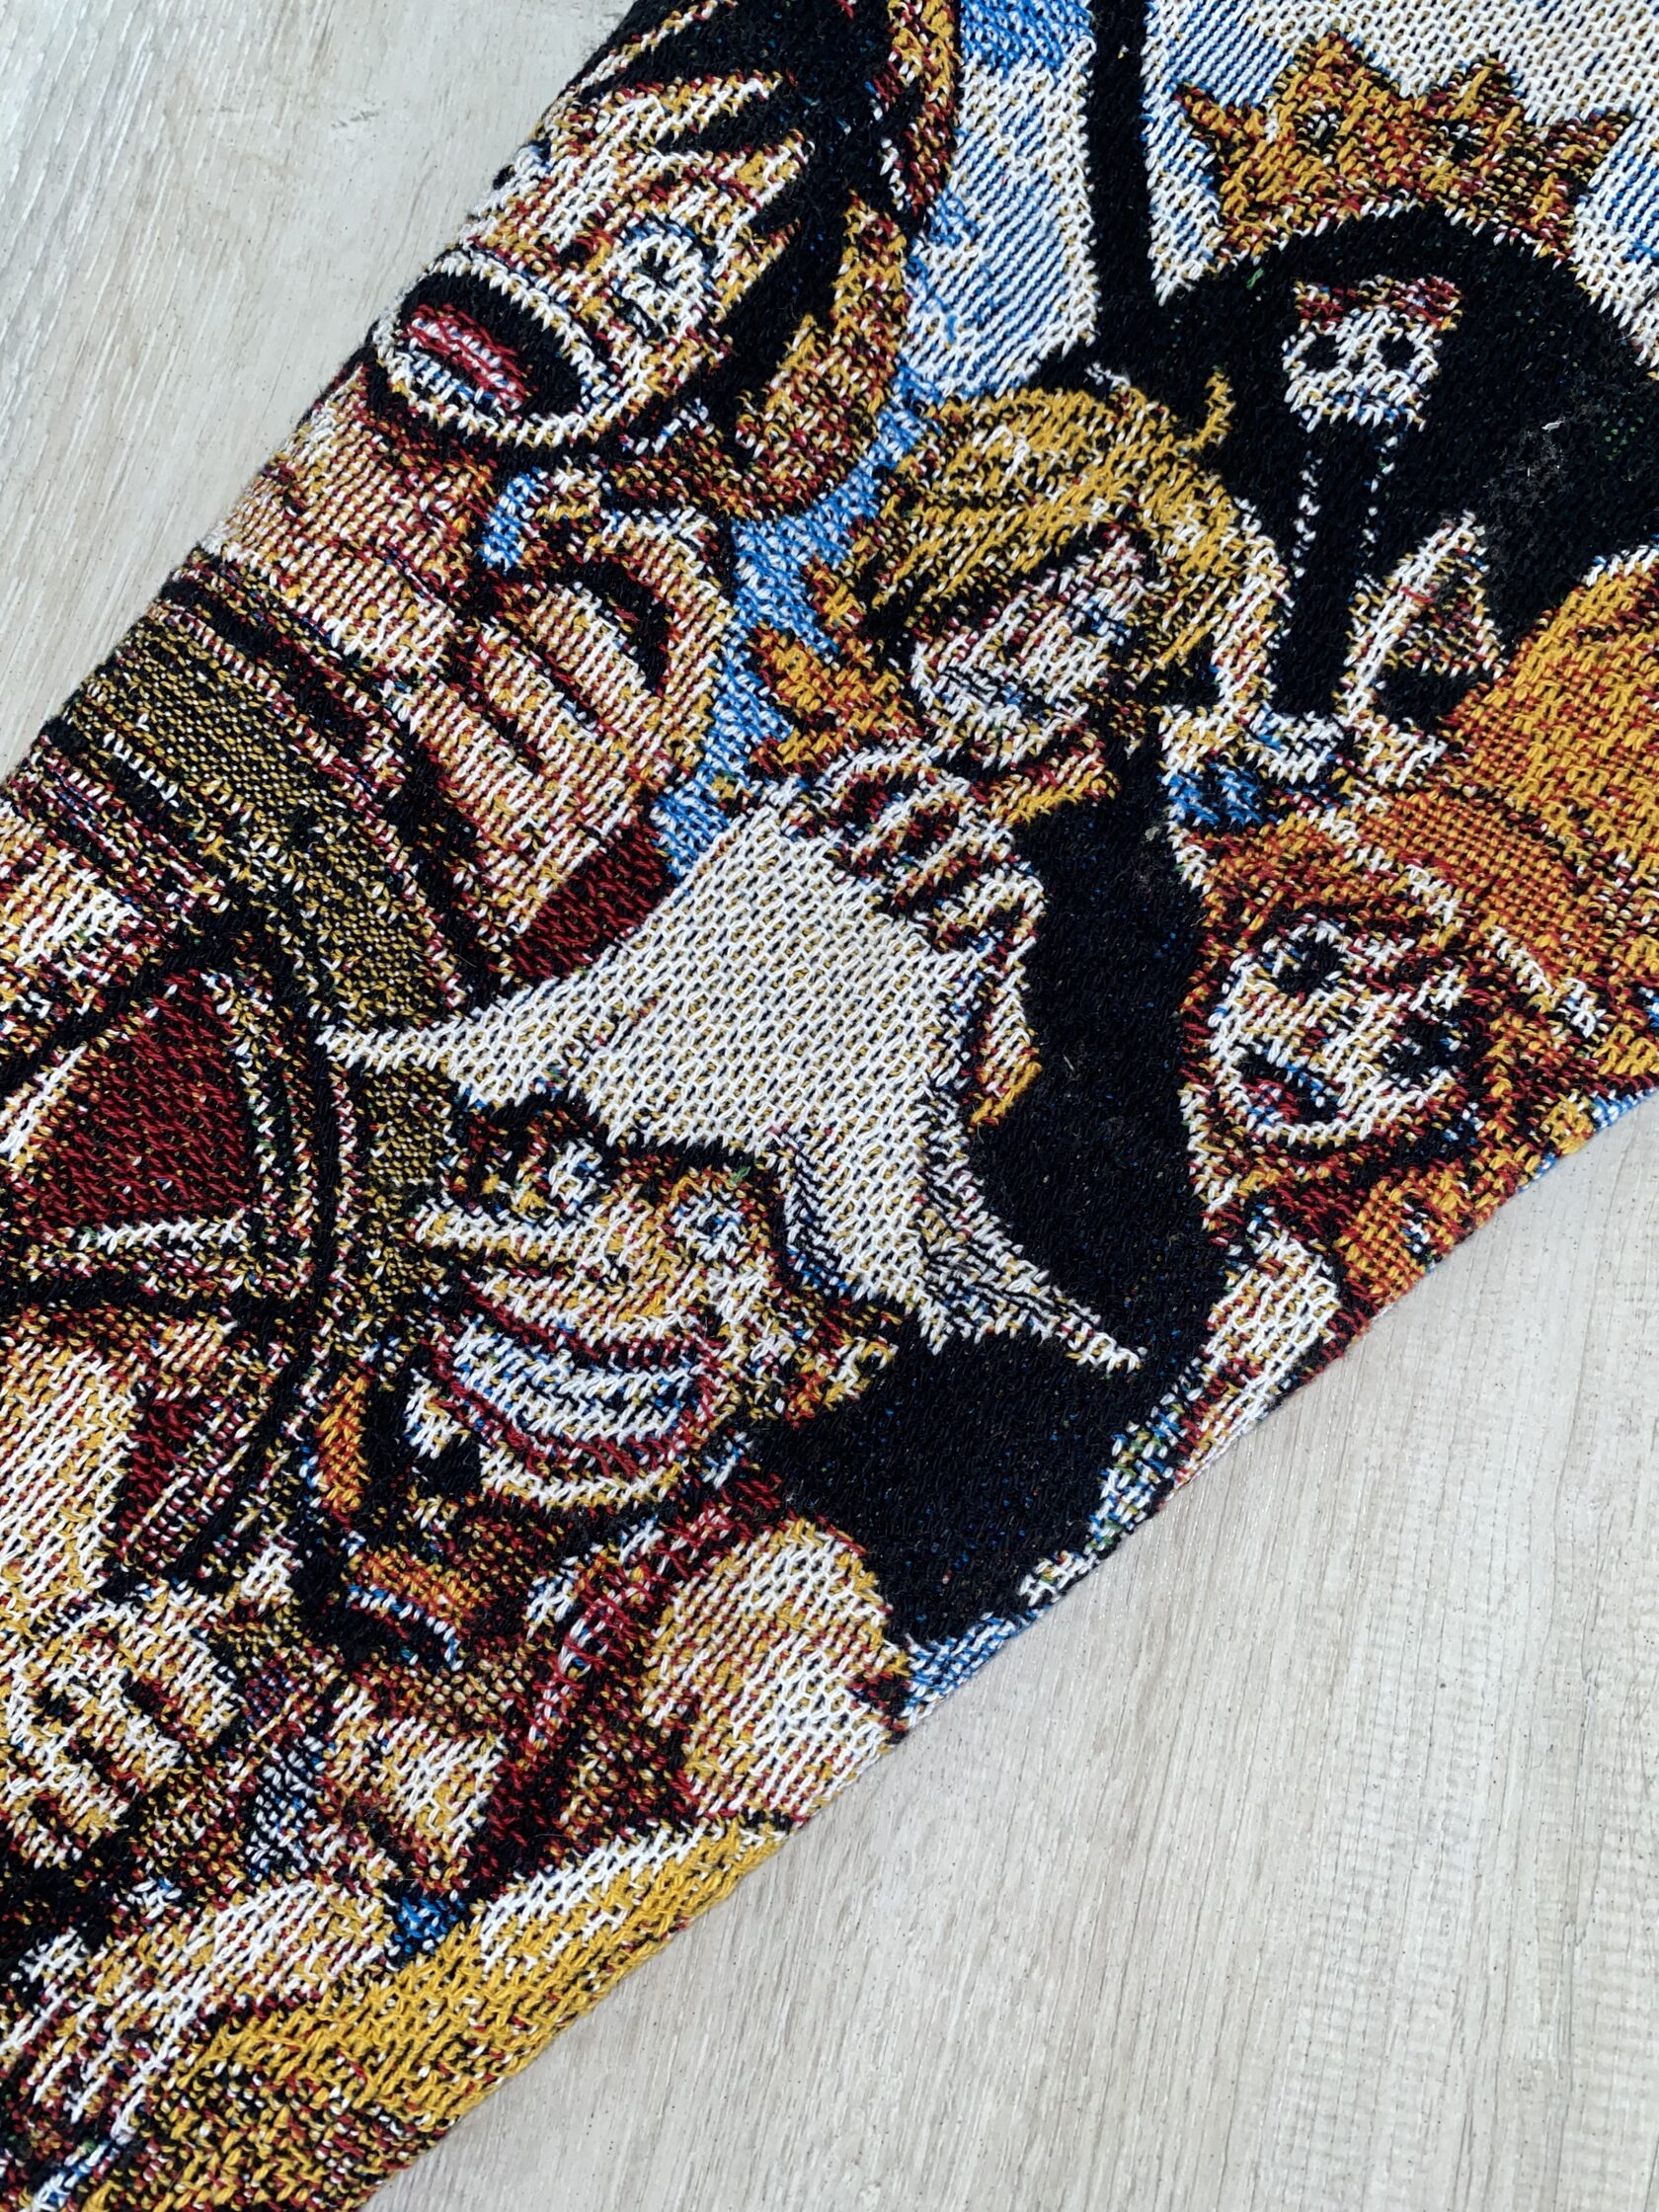 One Piece Chopper Tapestry by SwiftDesign